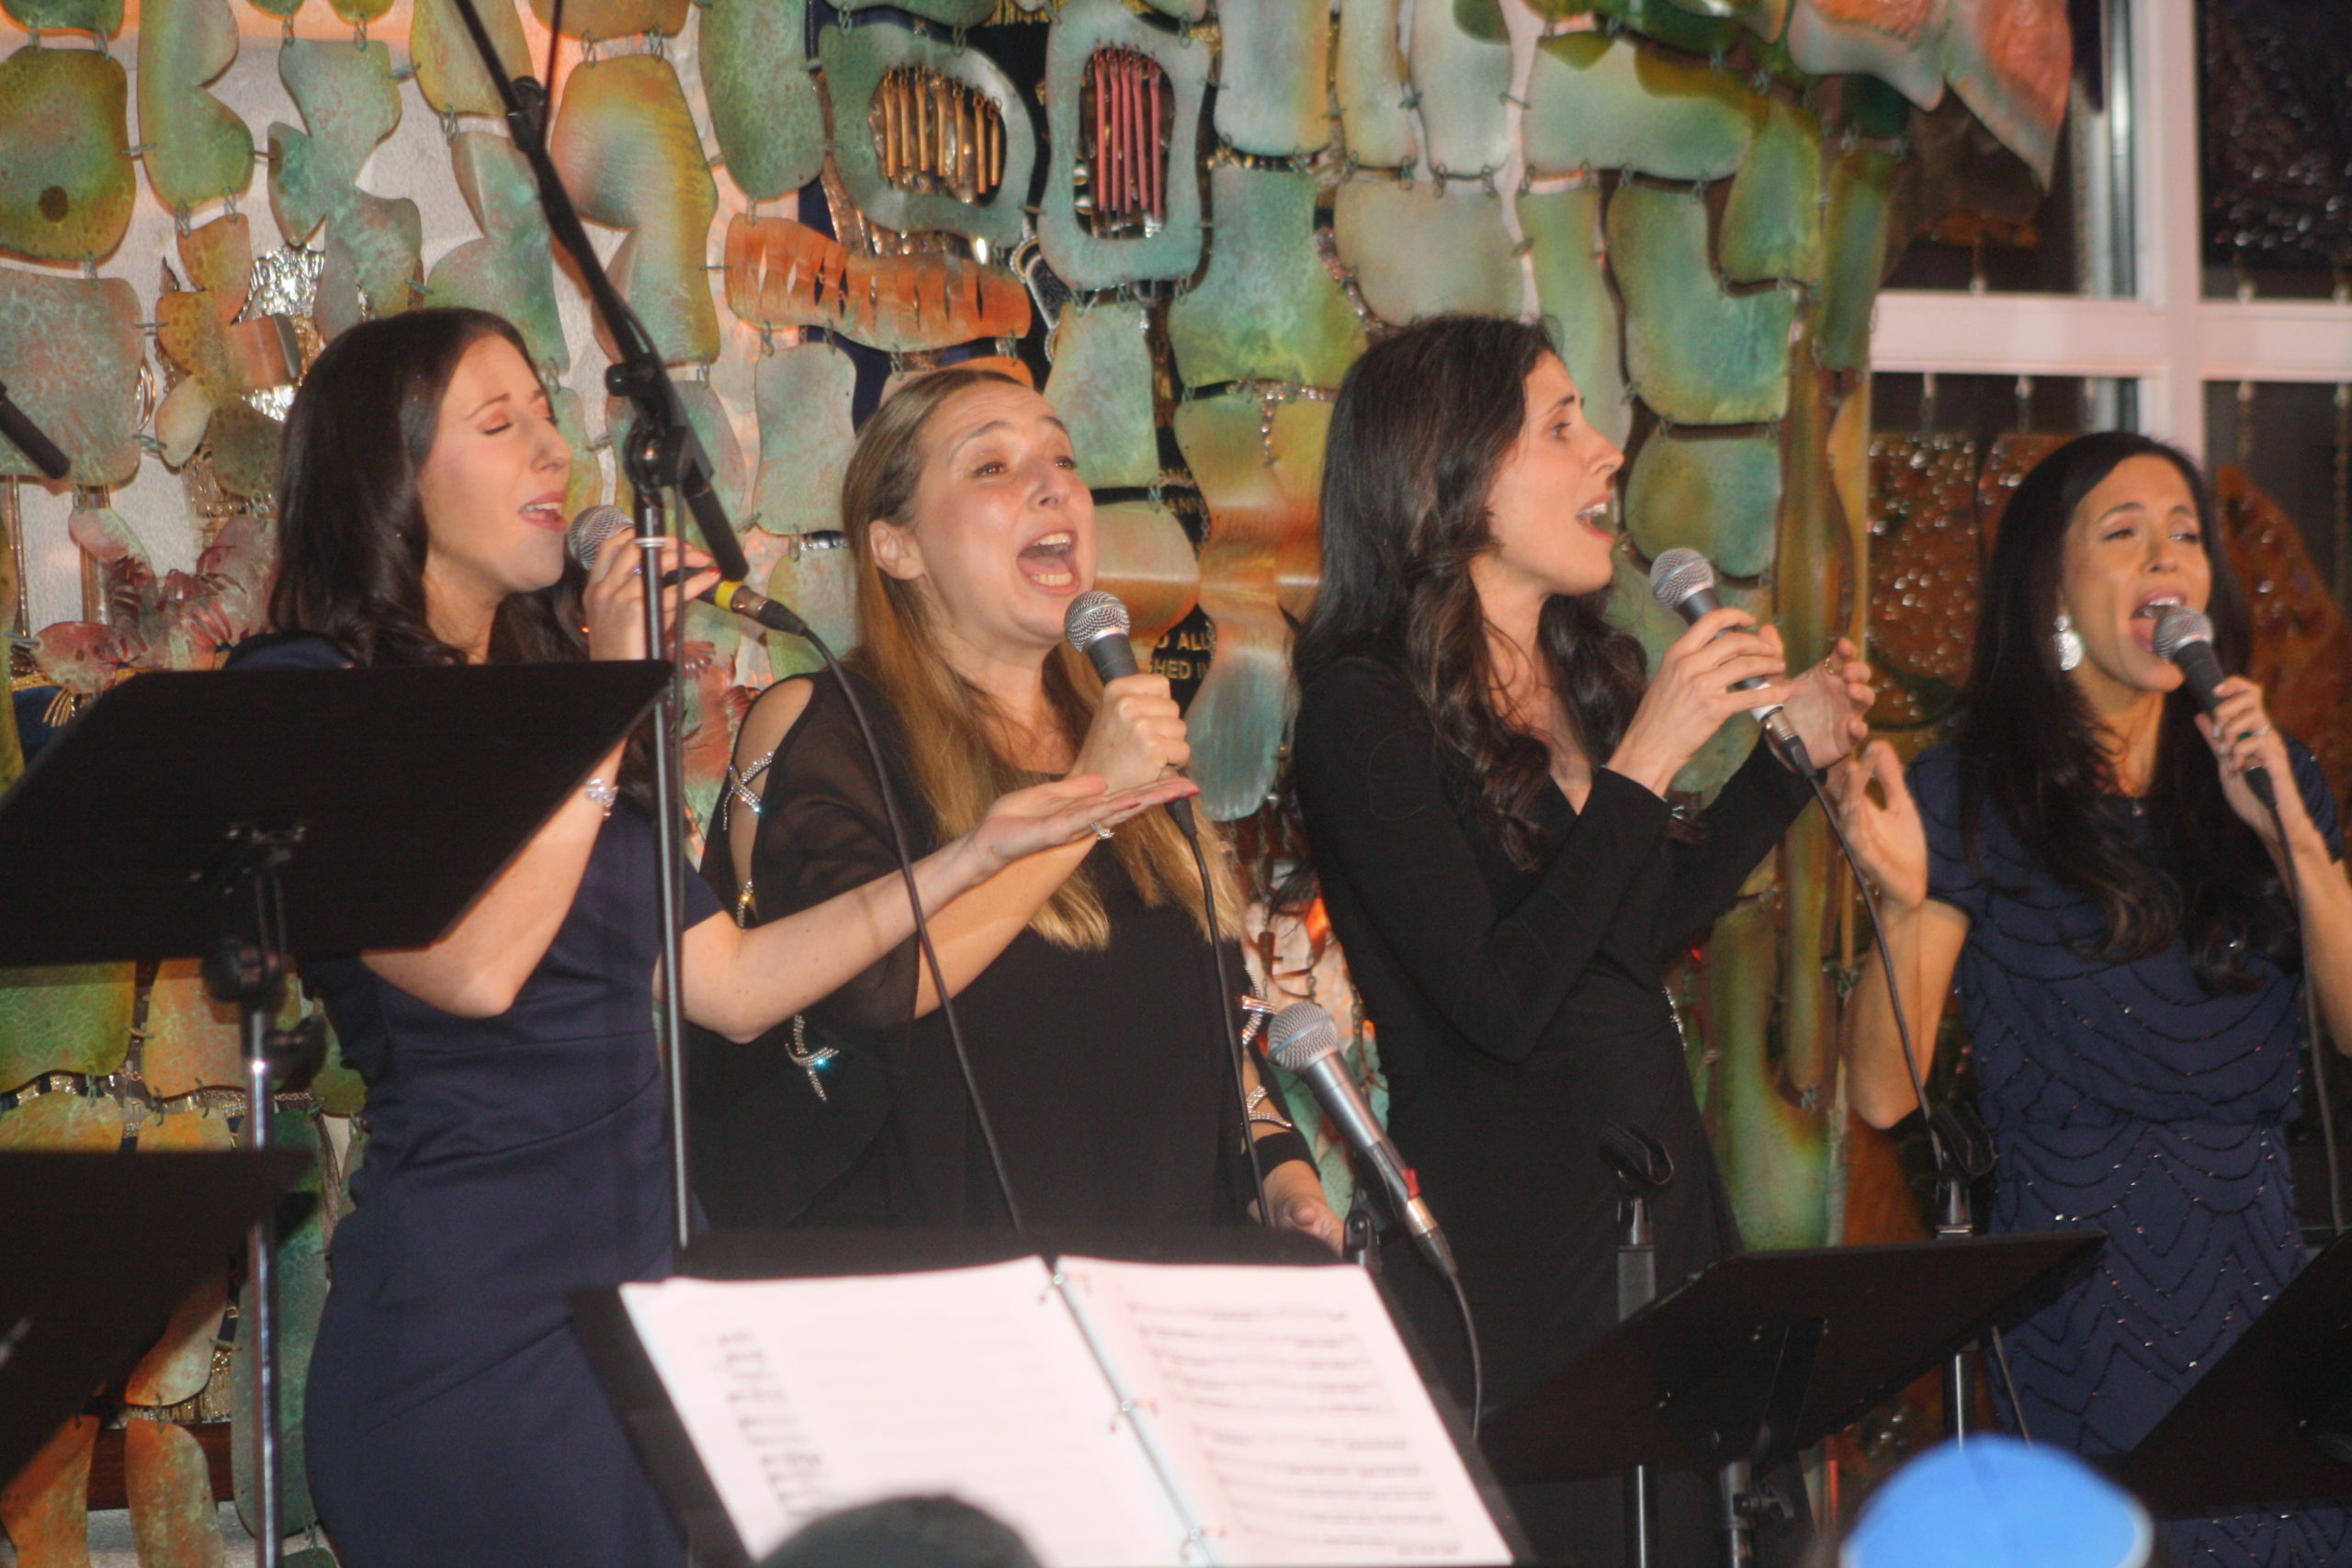 From left, cantors Rachel Goldman, Magda Fishman, Rachel Brook, and Laurie Akers in the first ever all female cantorial concert at the Hampton Synagogue in Westhampton Beach on Saturday, November 27. The four are considered the leading female cantors in the country.